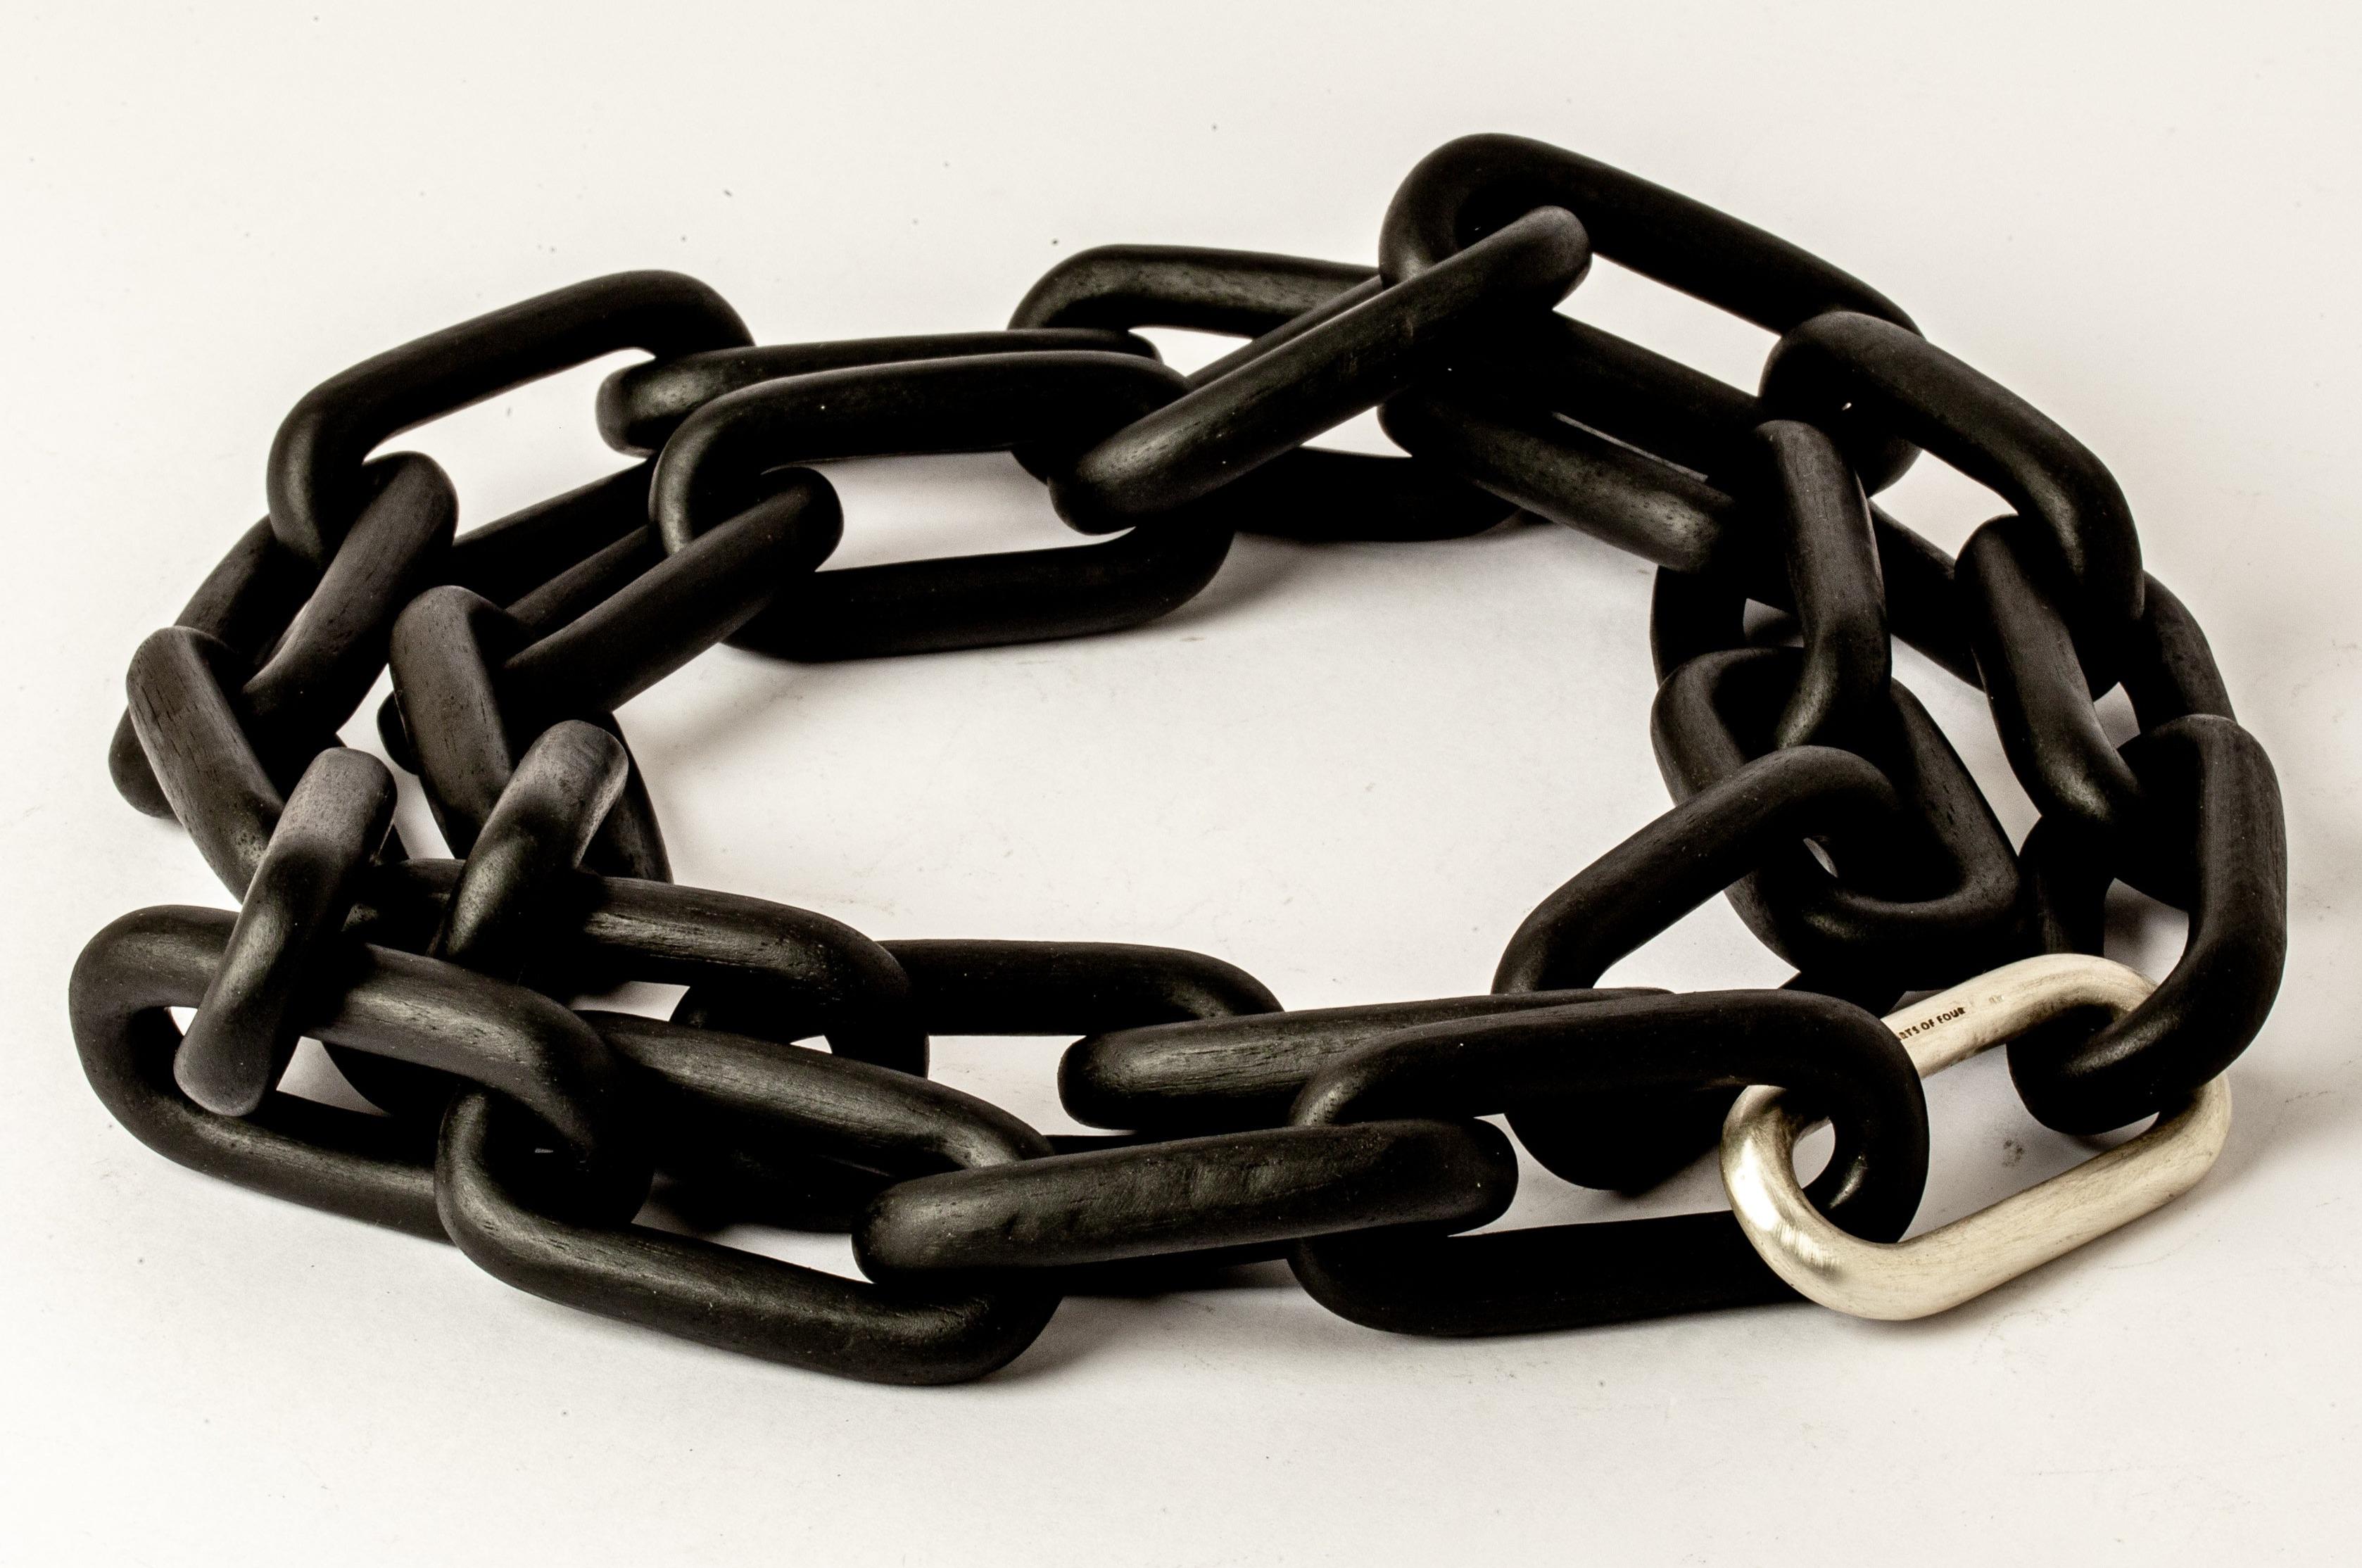 Chain necklace made of sterlings silver and wood. All organic chain is carved by hand. In the case of the chains made of wood, they are absolutely seamless; carved from a single long slab of wood (see link). 
The Charm System is an interrelated